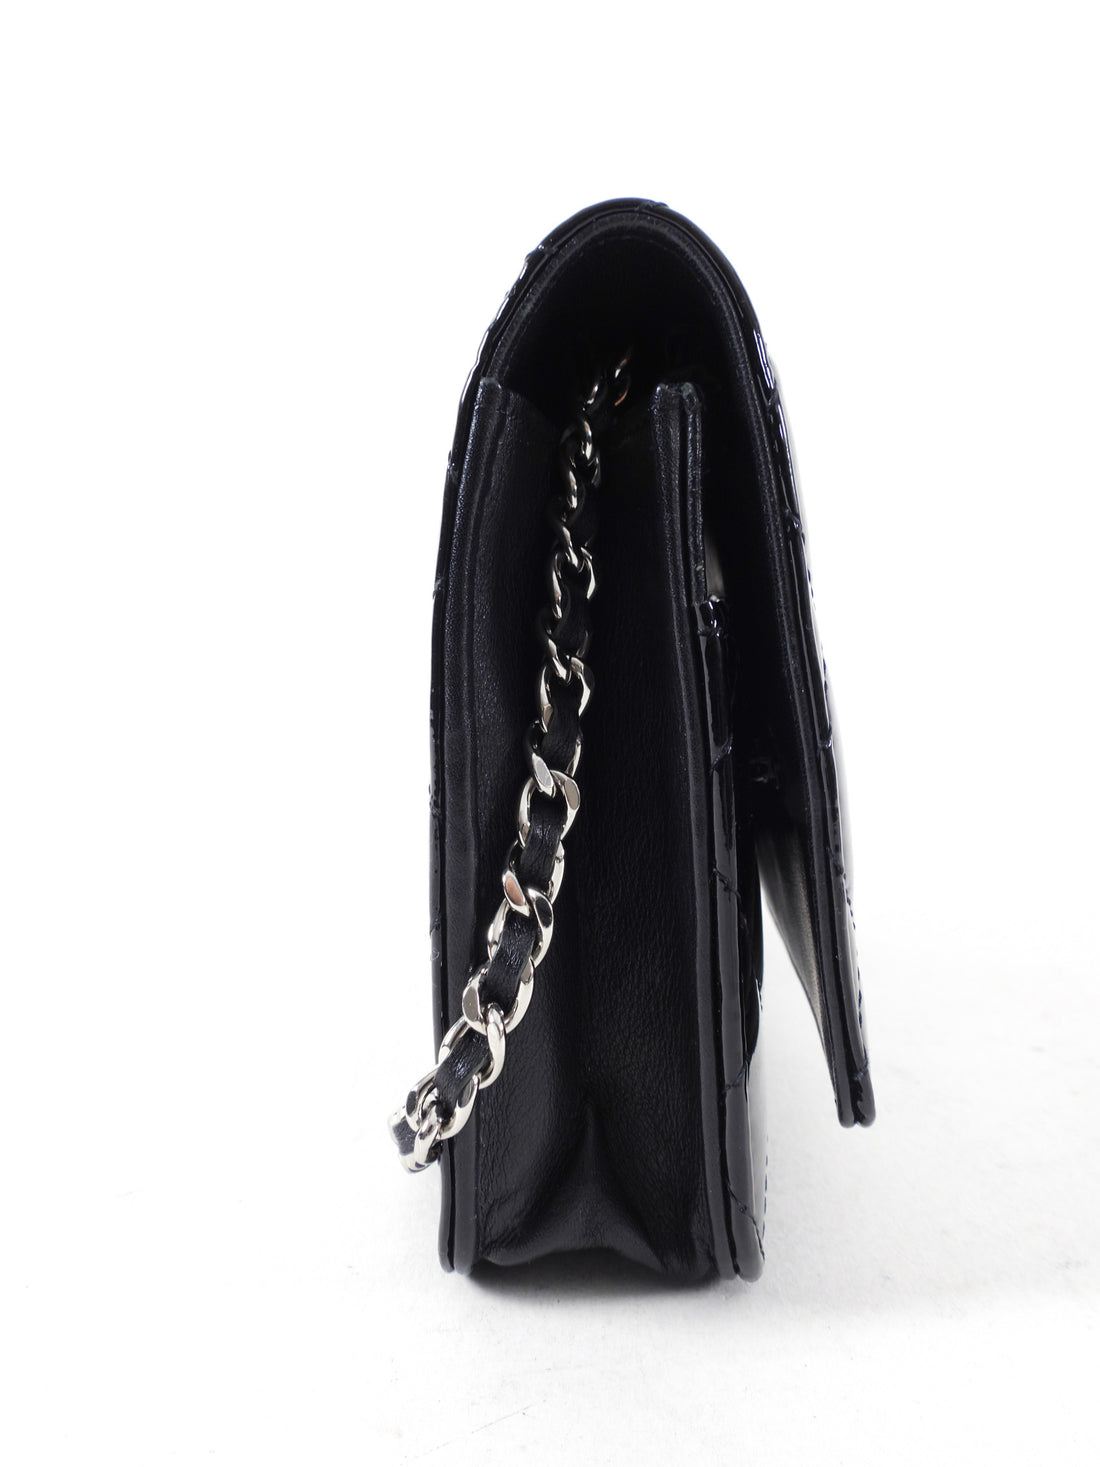 Chanel Black Patent Leather Classic Quilted Wallet on Chain WOC